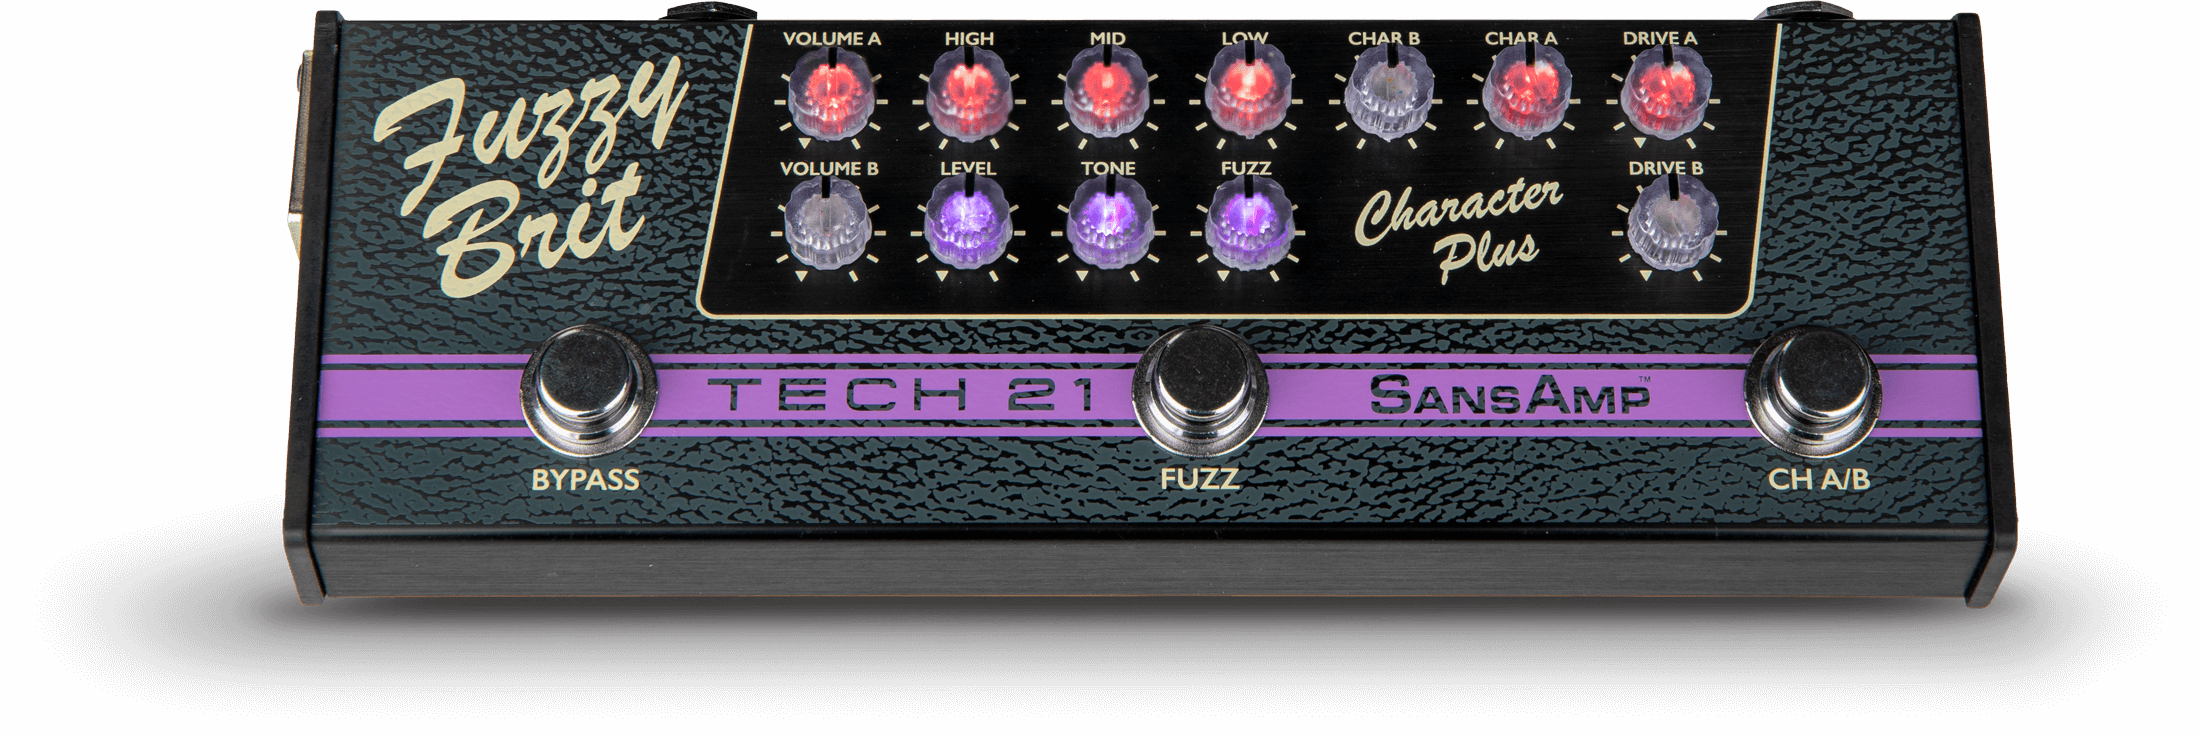 Tech 21 product image of the Fuzzy Brit pedal from the SansAmp Character Plus Series